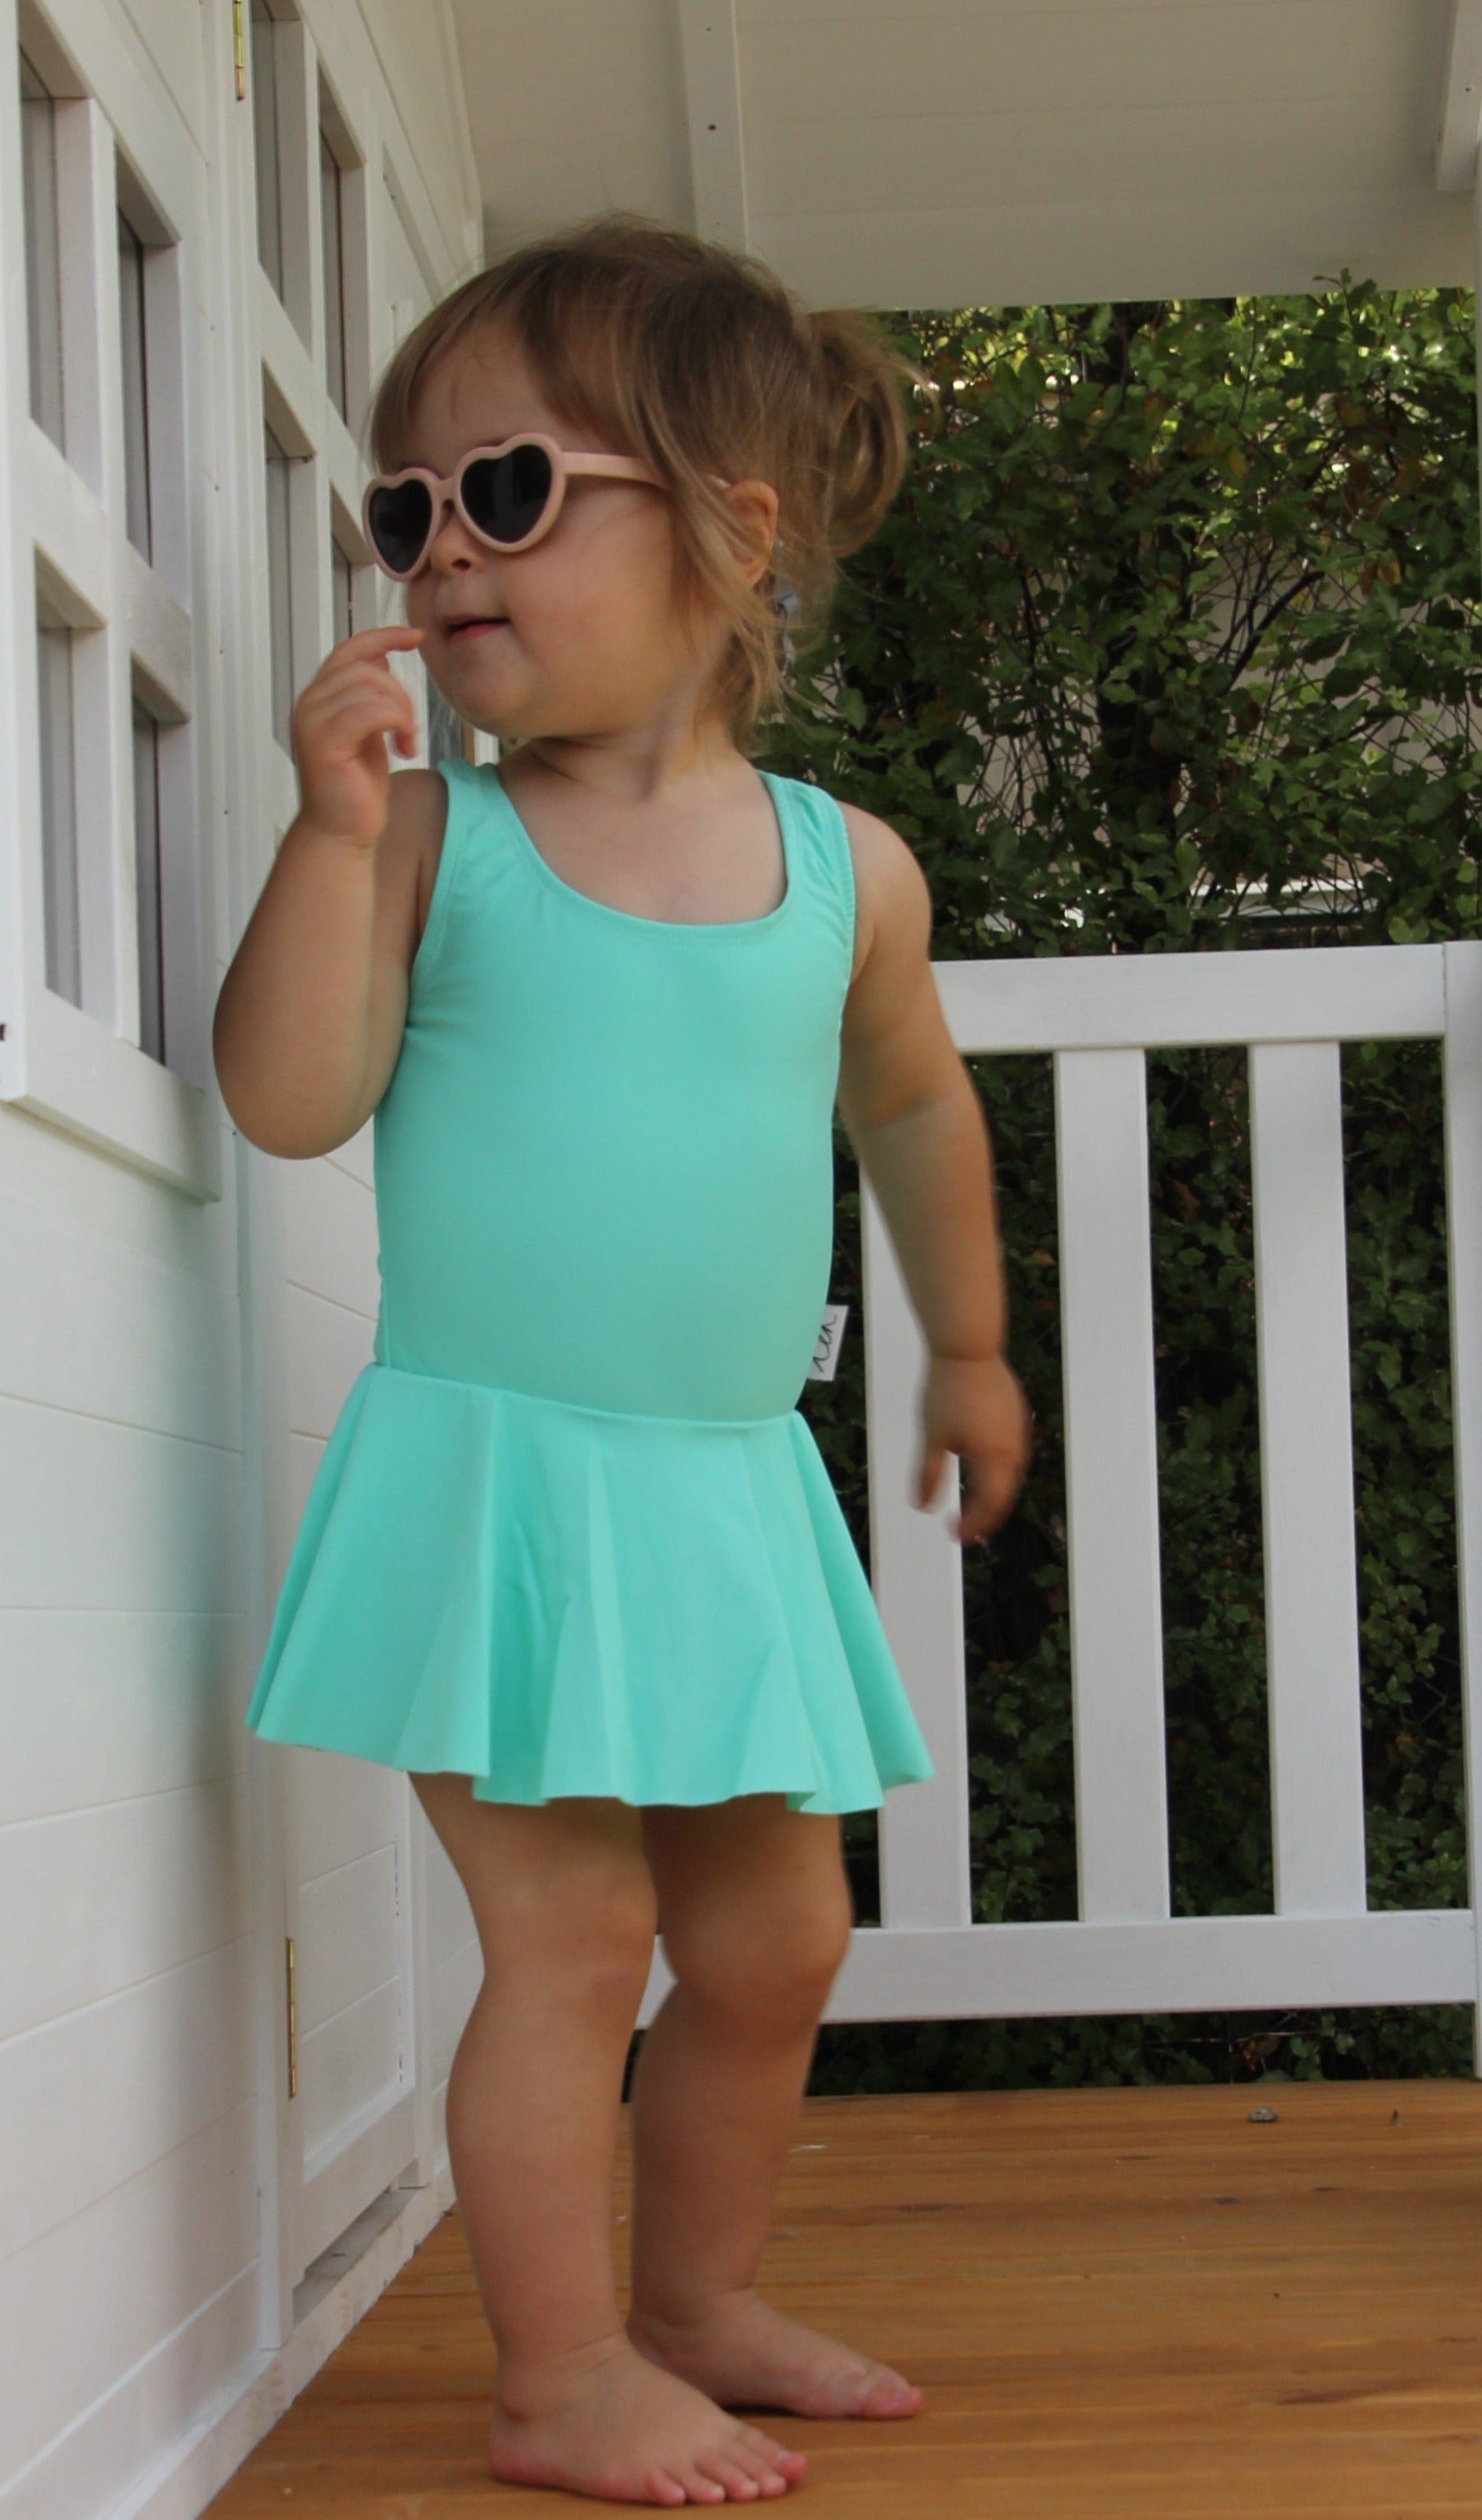 Baby toddler child wearing an aqua green swimsuit dress with snap closure at the bottom for nappy changes. Wearing heart sunglasses playing in a white cubby house